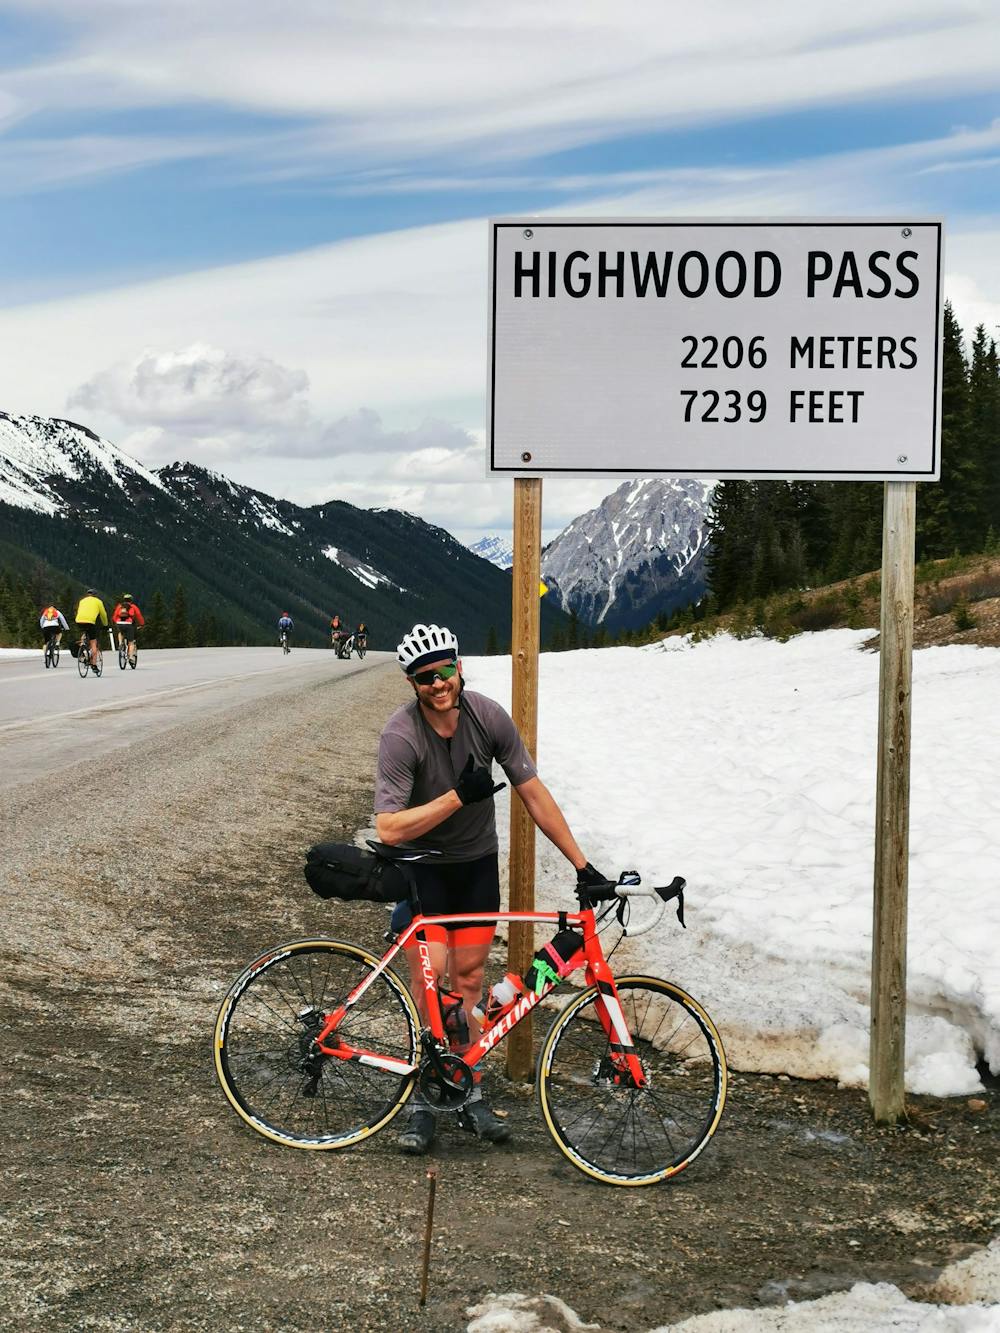 Author at summit of Highwood Pass, 2,206m